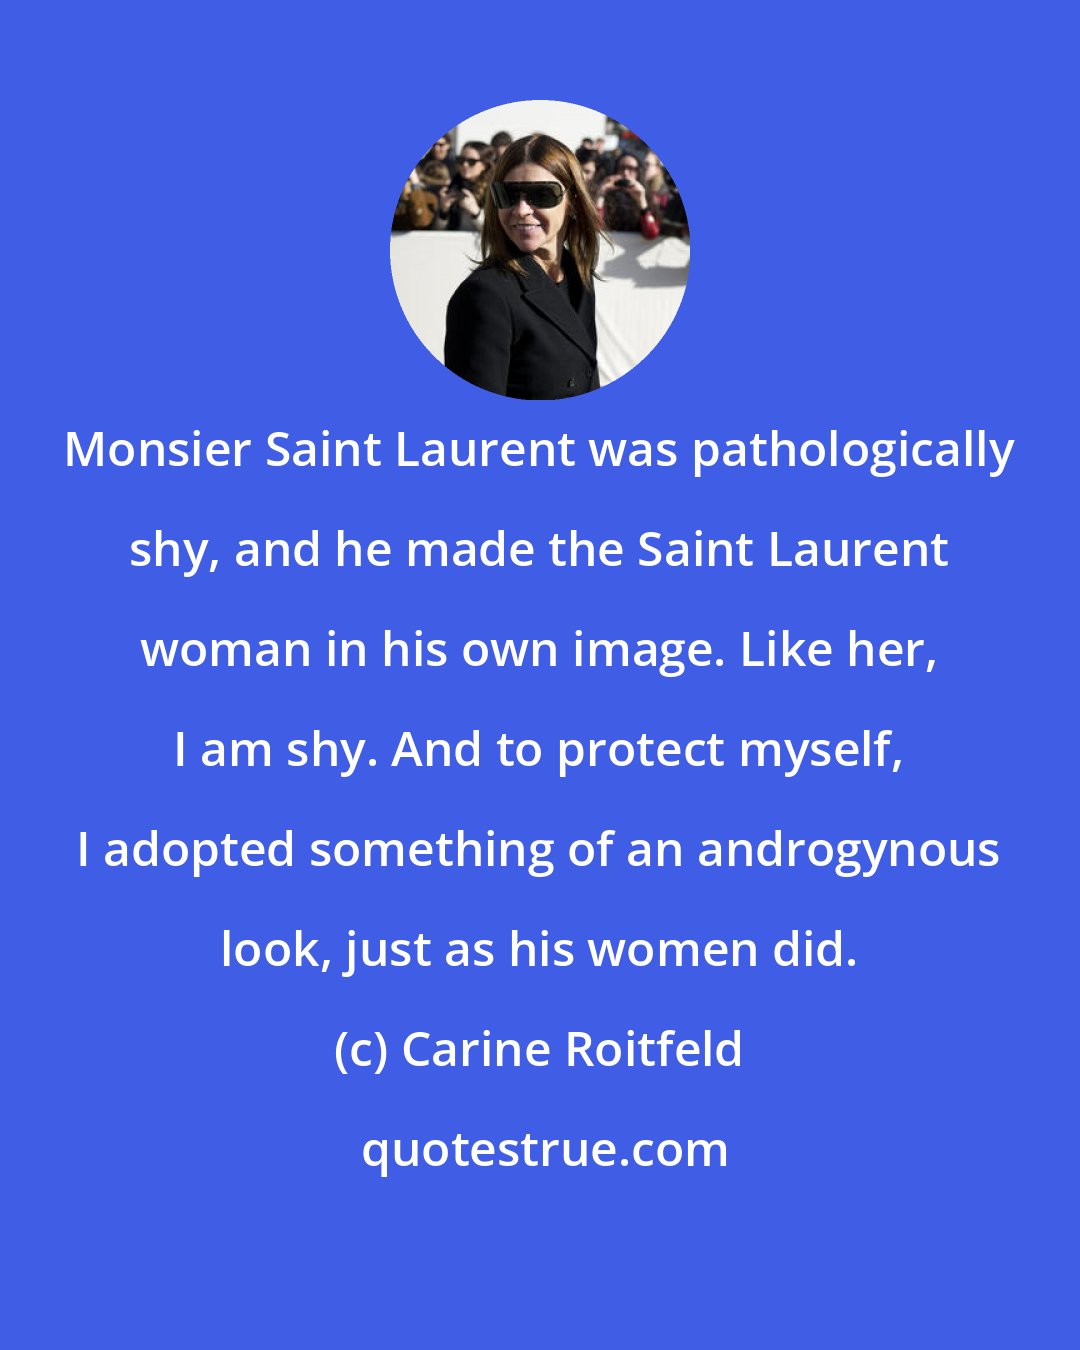 Carine Roitfeld: Monsier Saint Laurent was pathologically shy, and he made the Saint Laurent woman in his own image. Like her, I am shy. And to protect myself, I adopted something of an androgynous look, just as his women did.